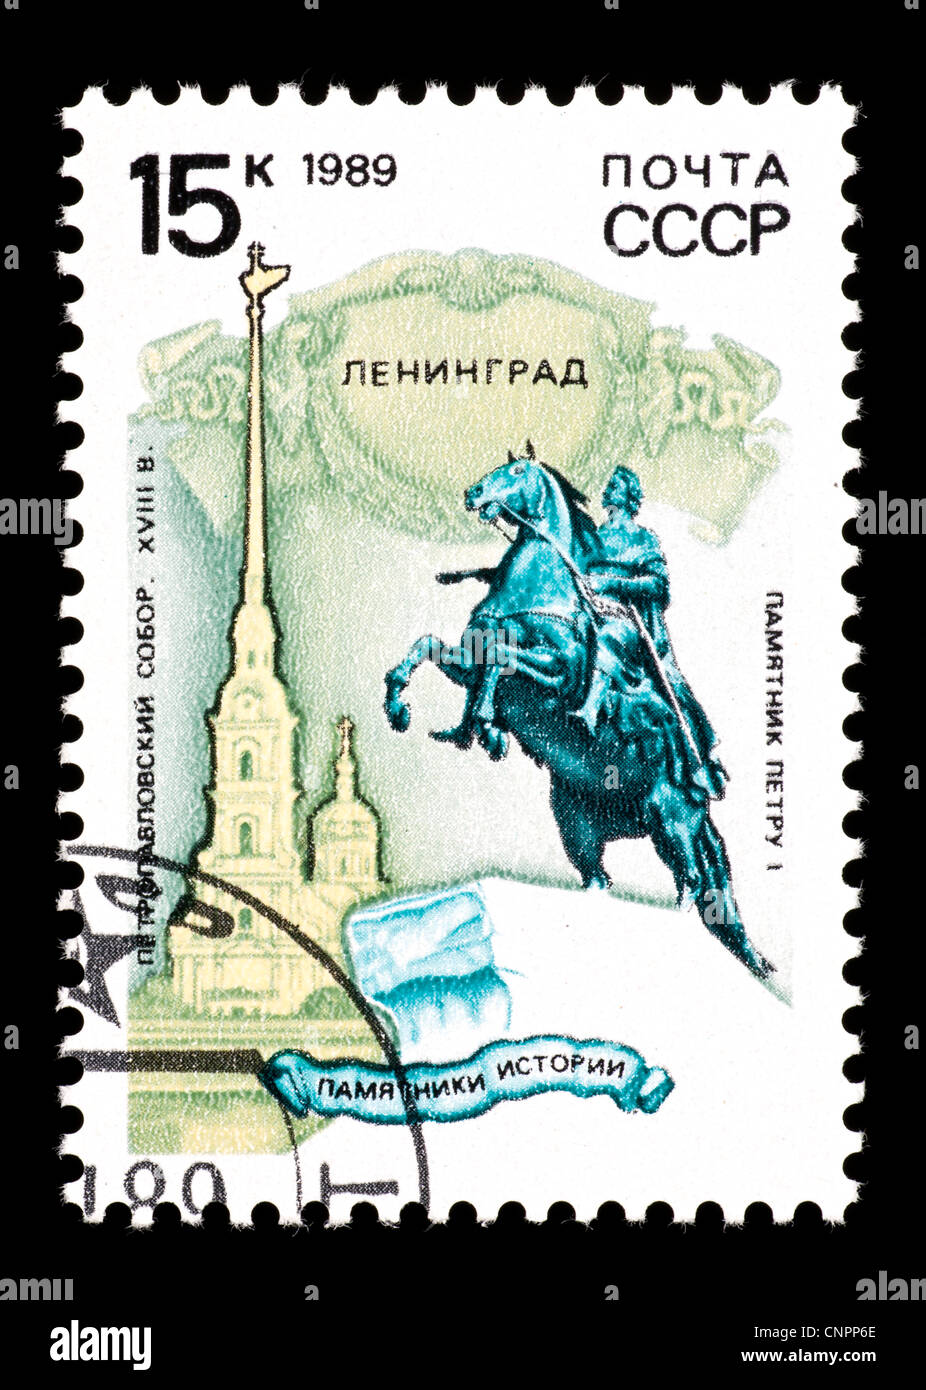 Postage stamp from the Soviet Union depicting the Petropavlovsky Cathedral and statue of Peter the Great in Leningrad. Stock Photo